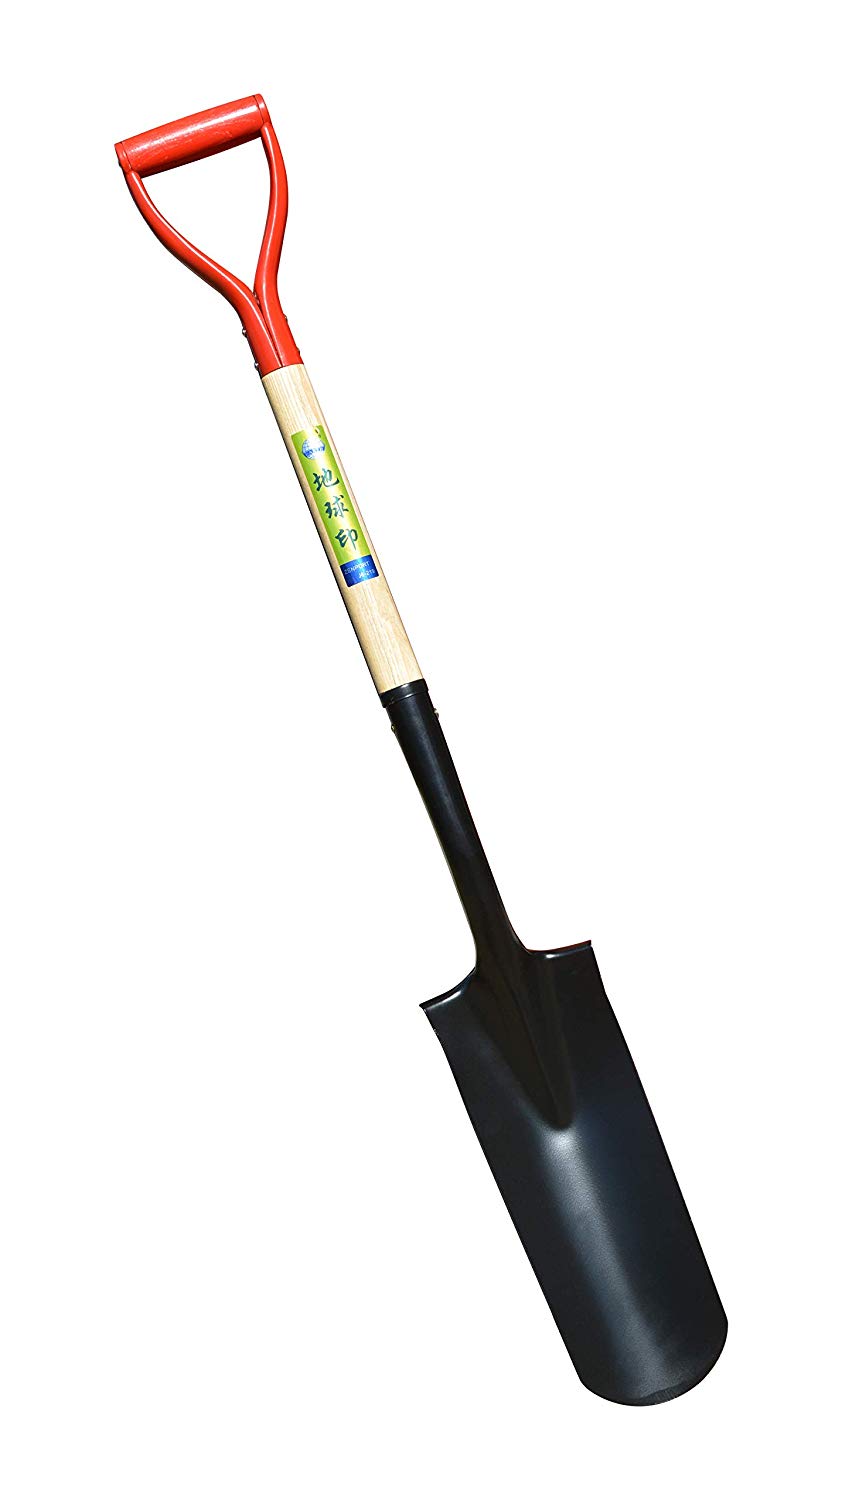 Zenport Irrigation Shovel J6-219 - 14.5-Inch Spade Blade and Wood Handle for Efficient Water Management and Gardening